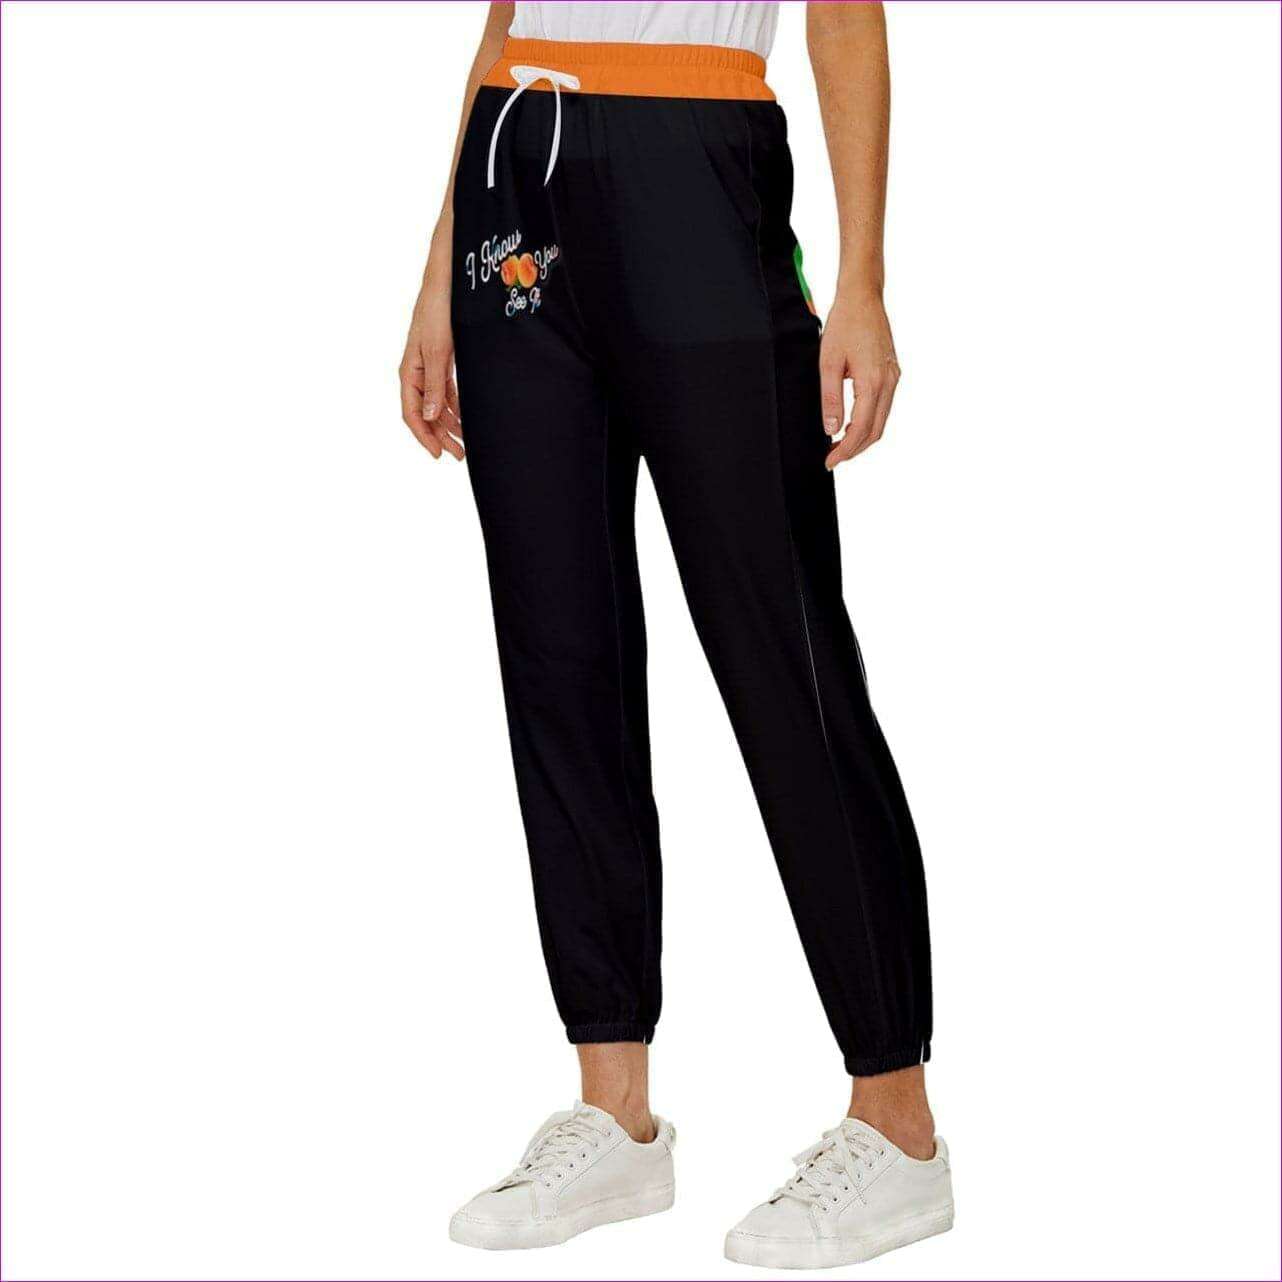 "I Know You See It" Black Cropped Drawstring Pants - women's sweatpants at TFC&H Co.